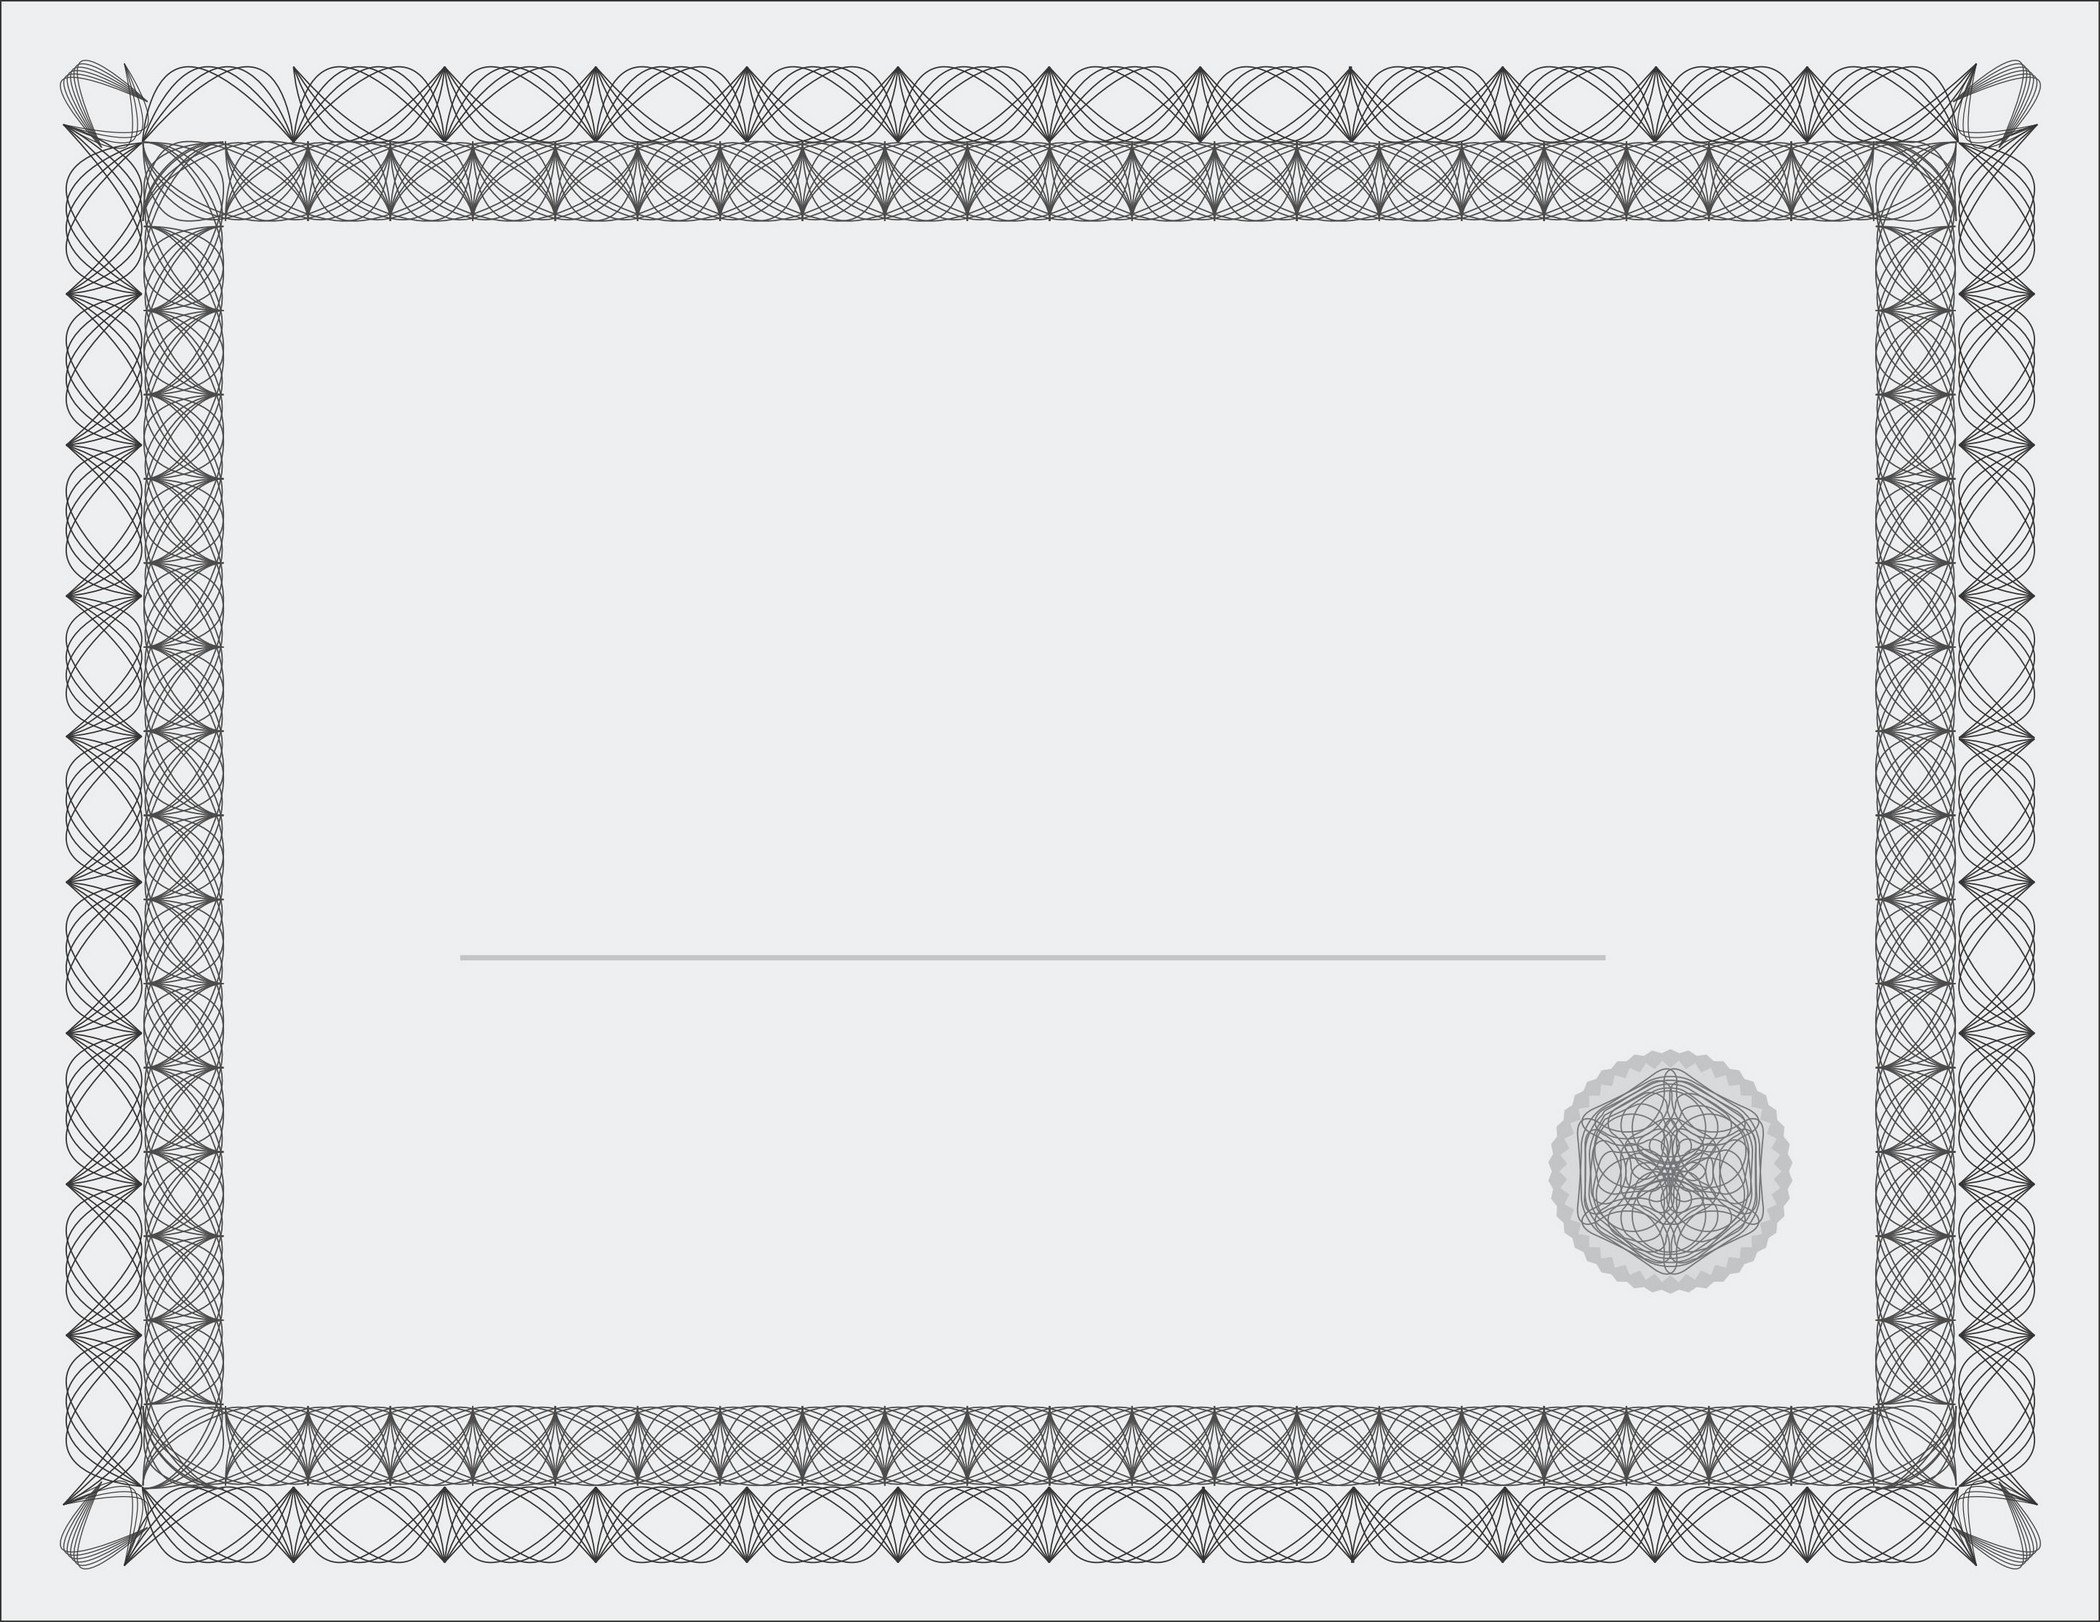 Free Certificate Border Templates for Word